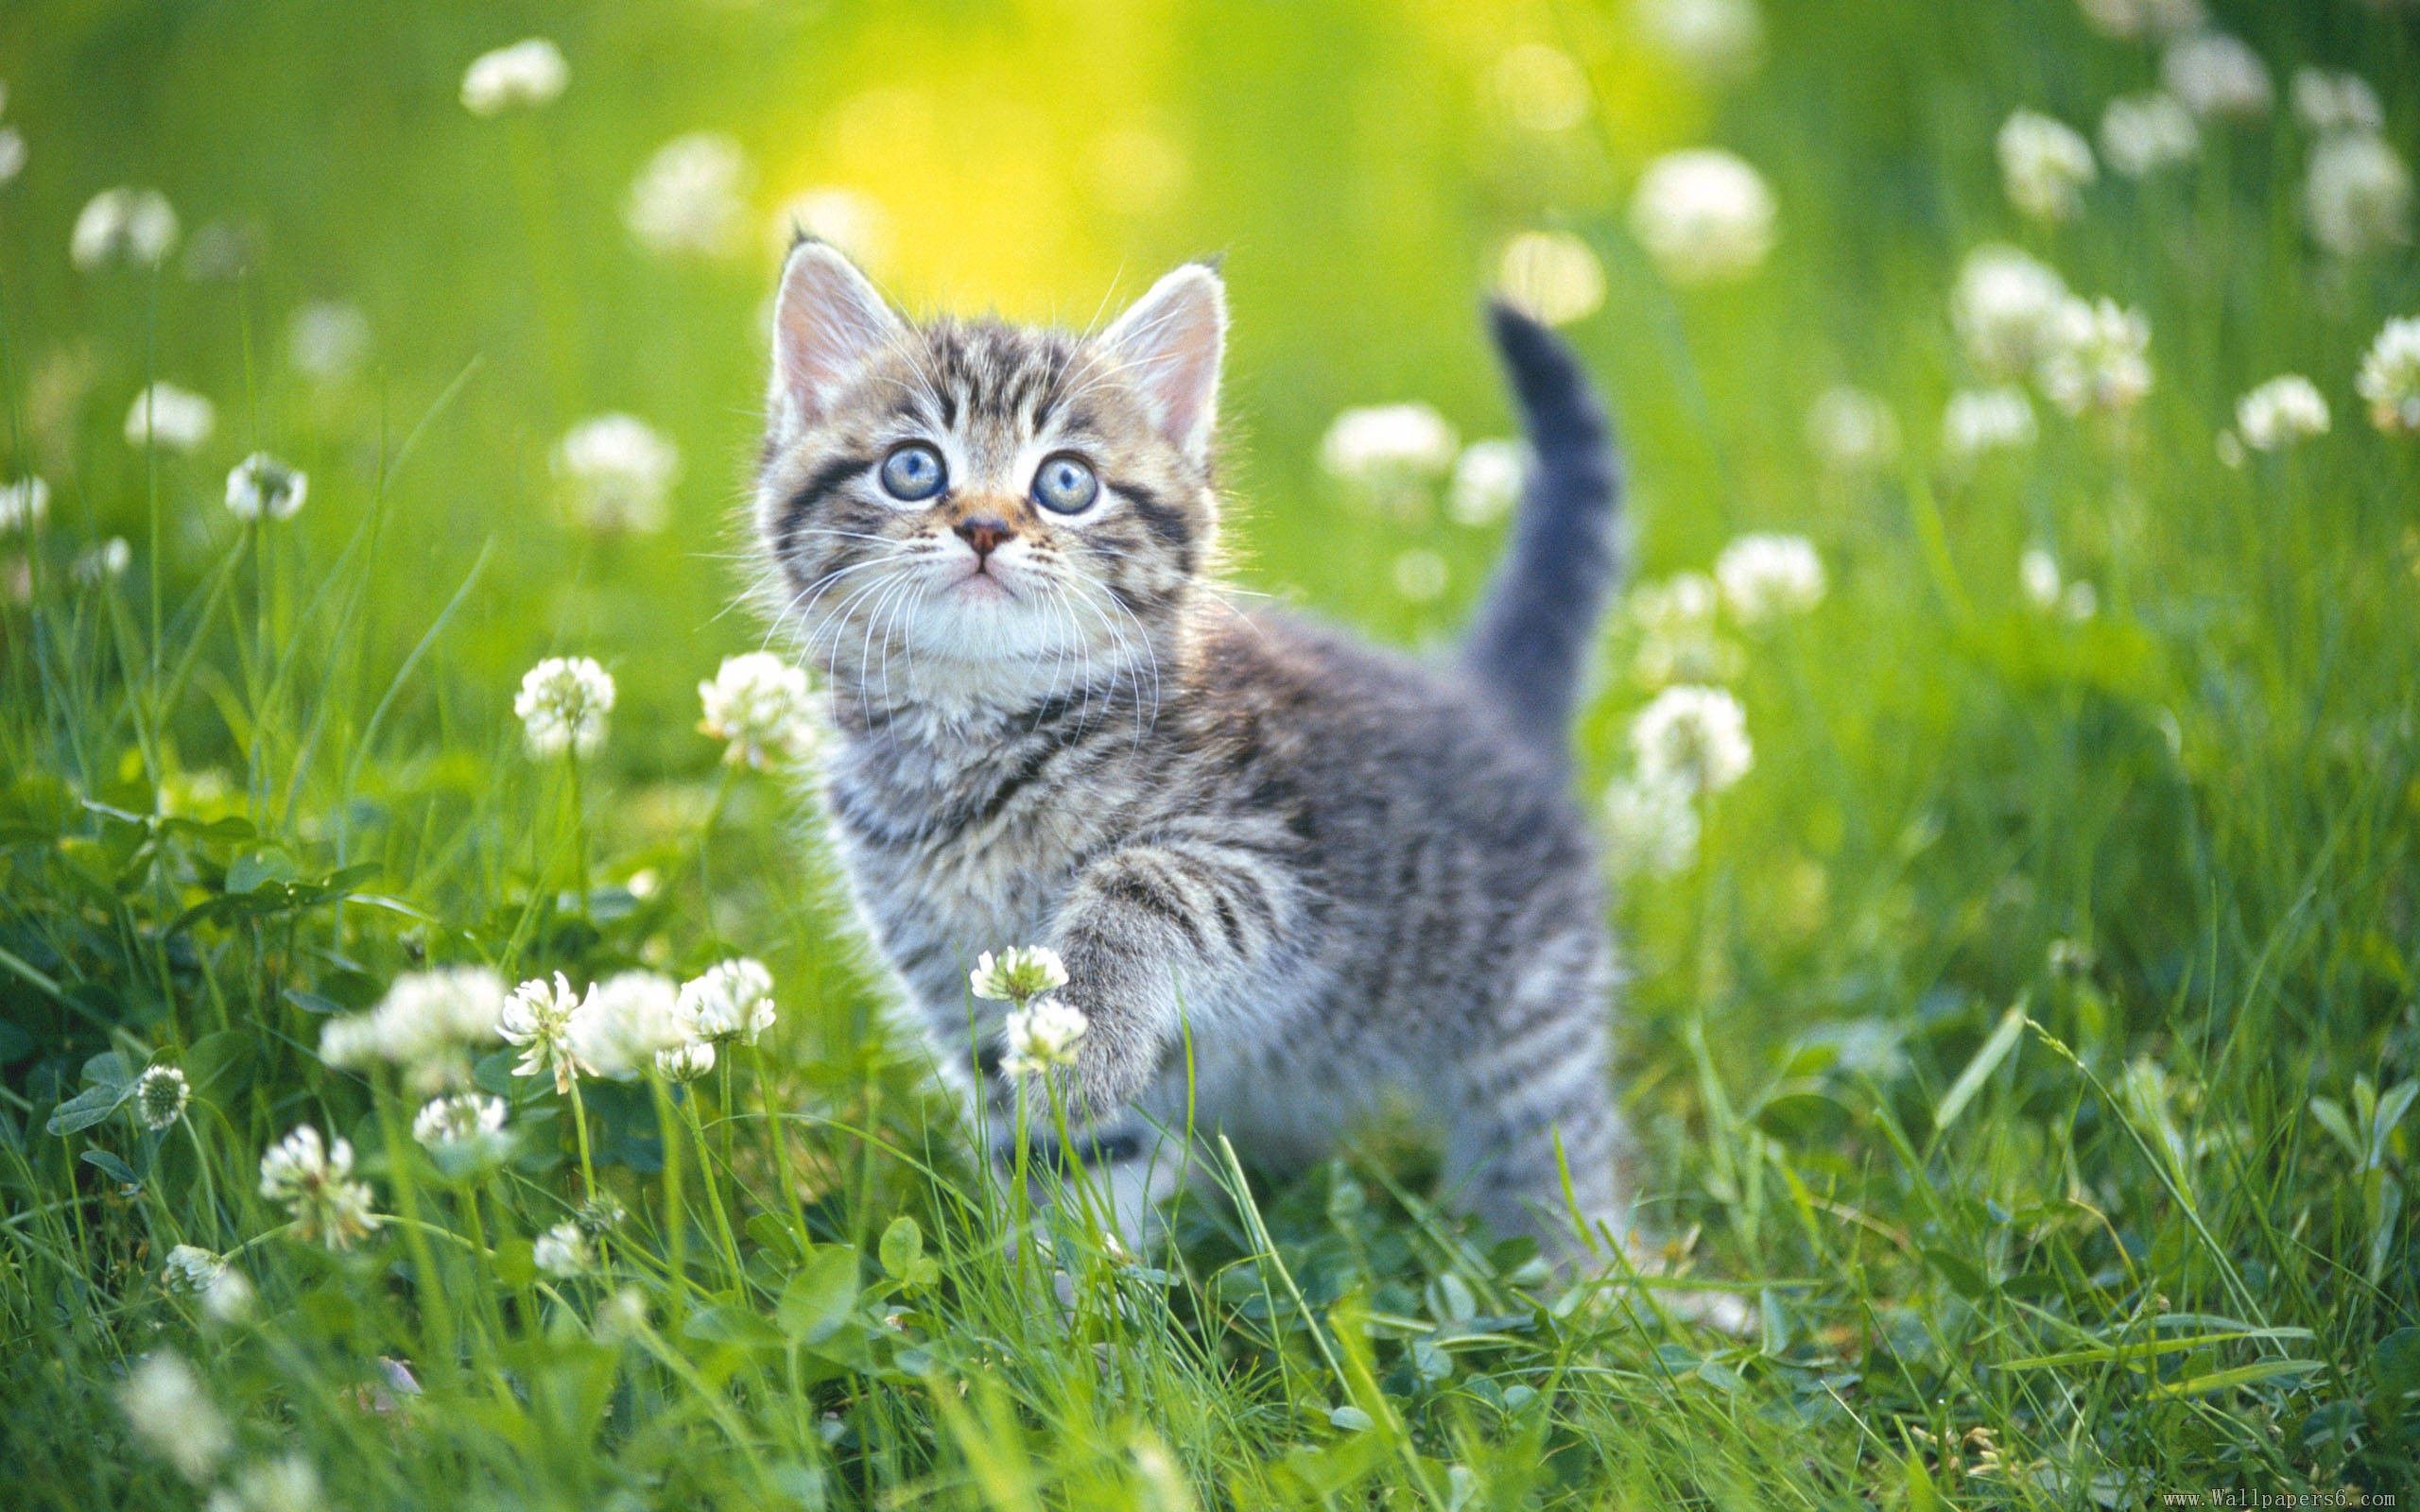 122267 download wallpaper animals, flowers, grass, kitty, kitten, striped screensavers and pictures for free